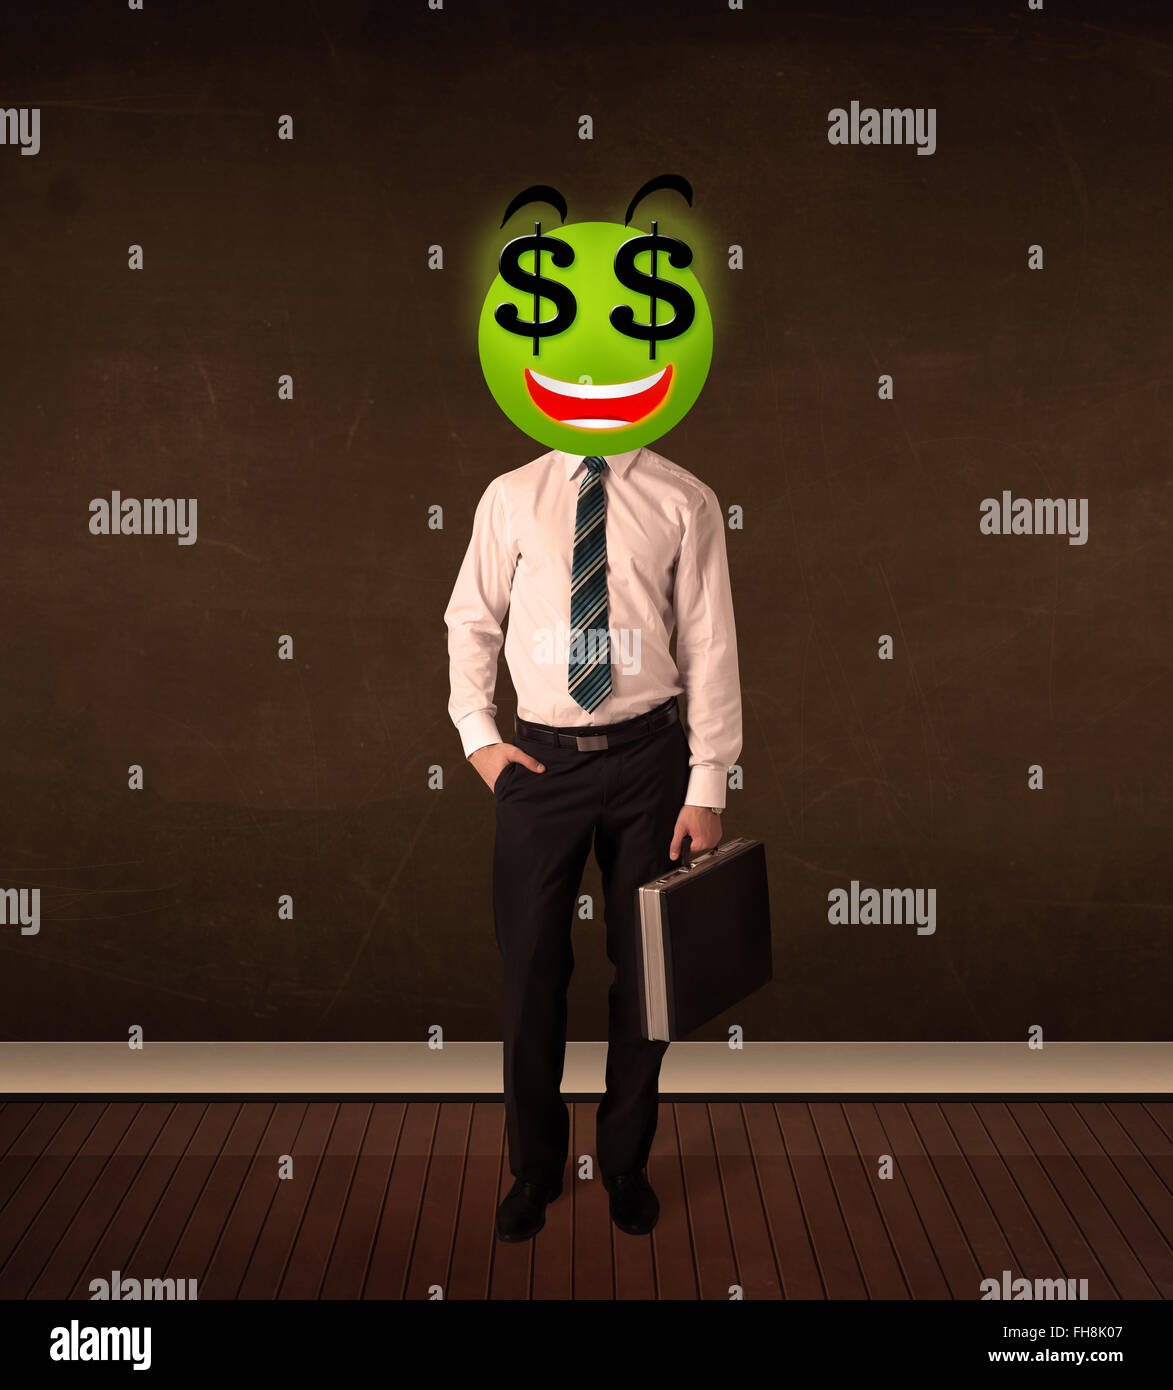 man with dollar sign smiley face Stock Photo